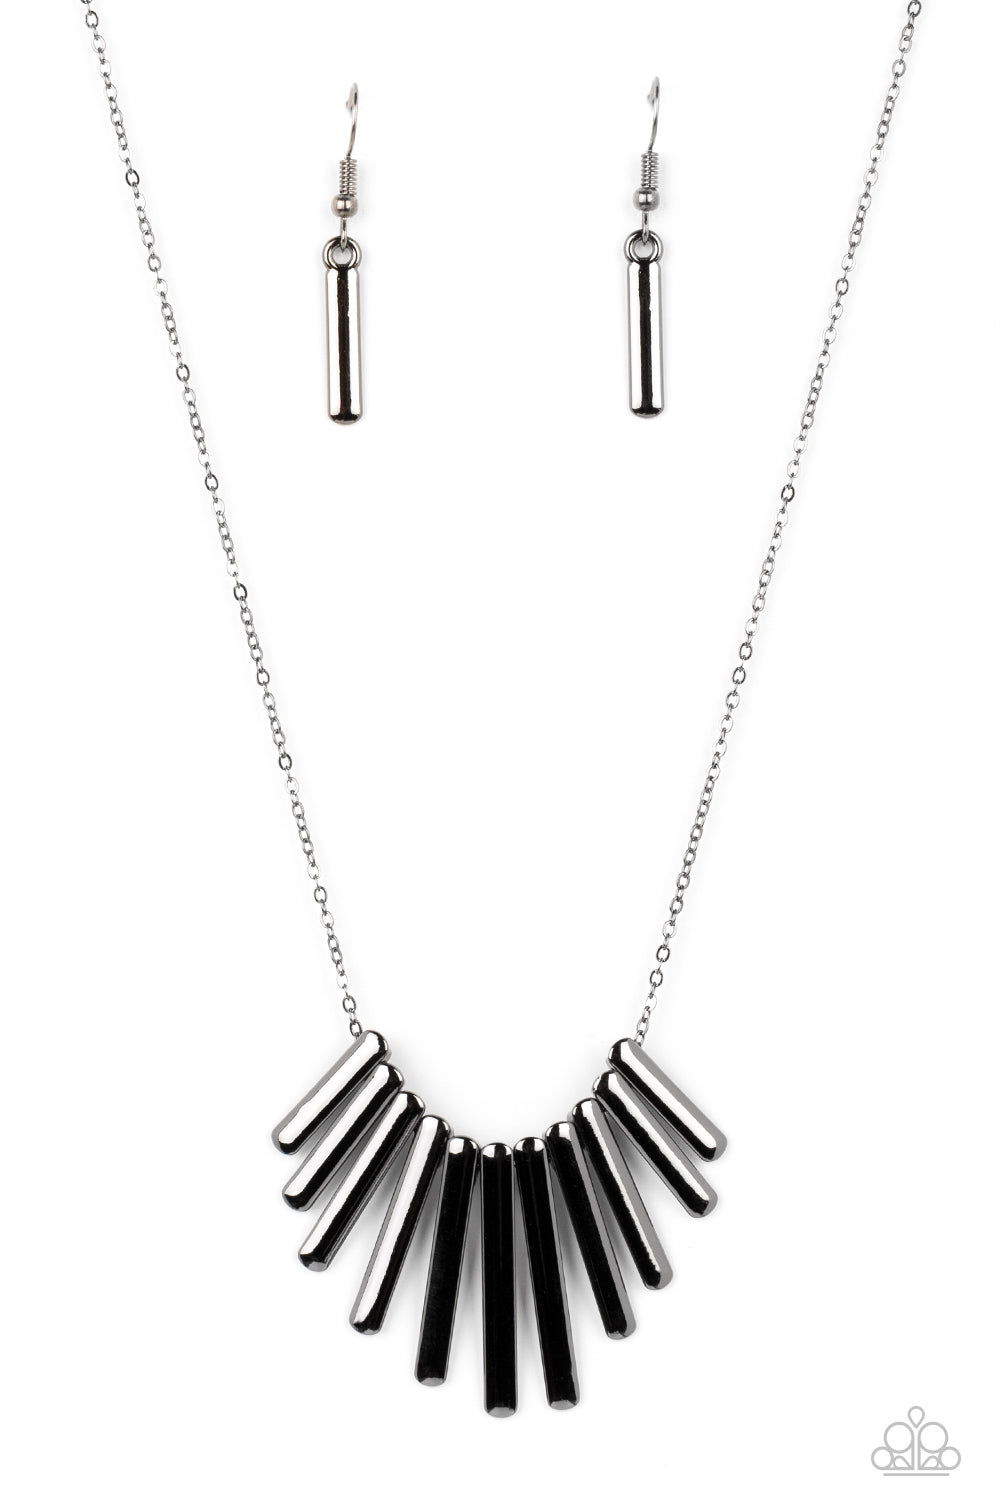 Leading MANE Paparazzi Accessories Necklace with Earrings - Black